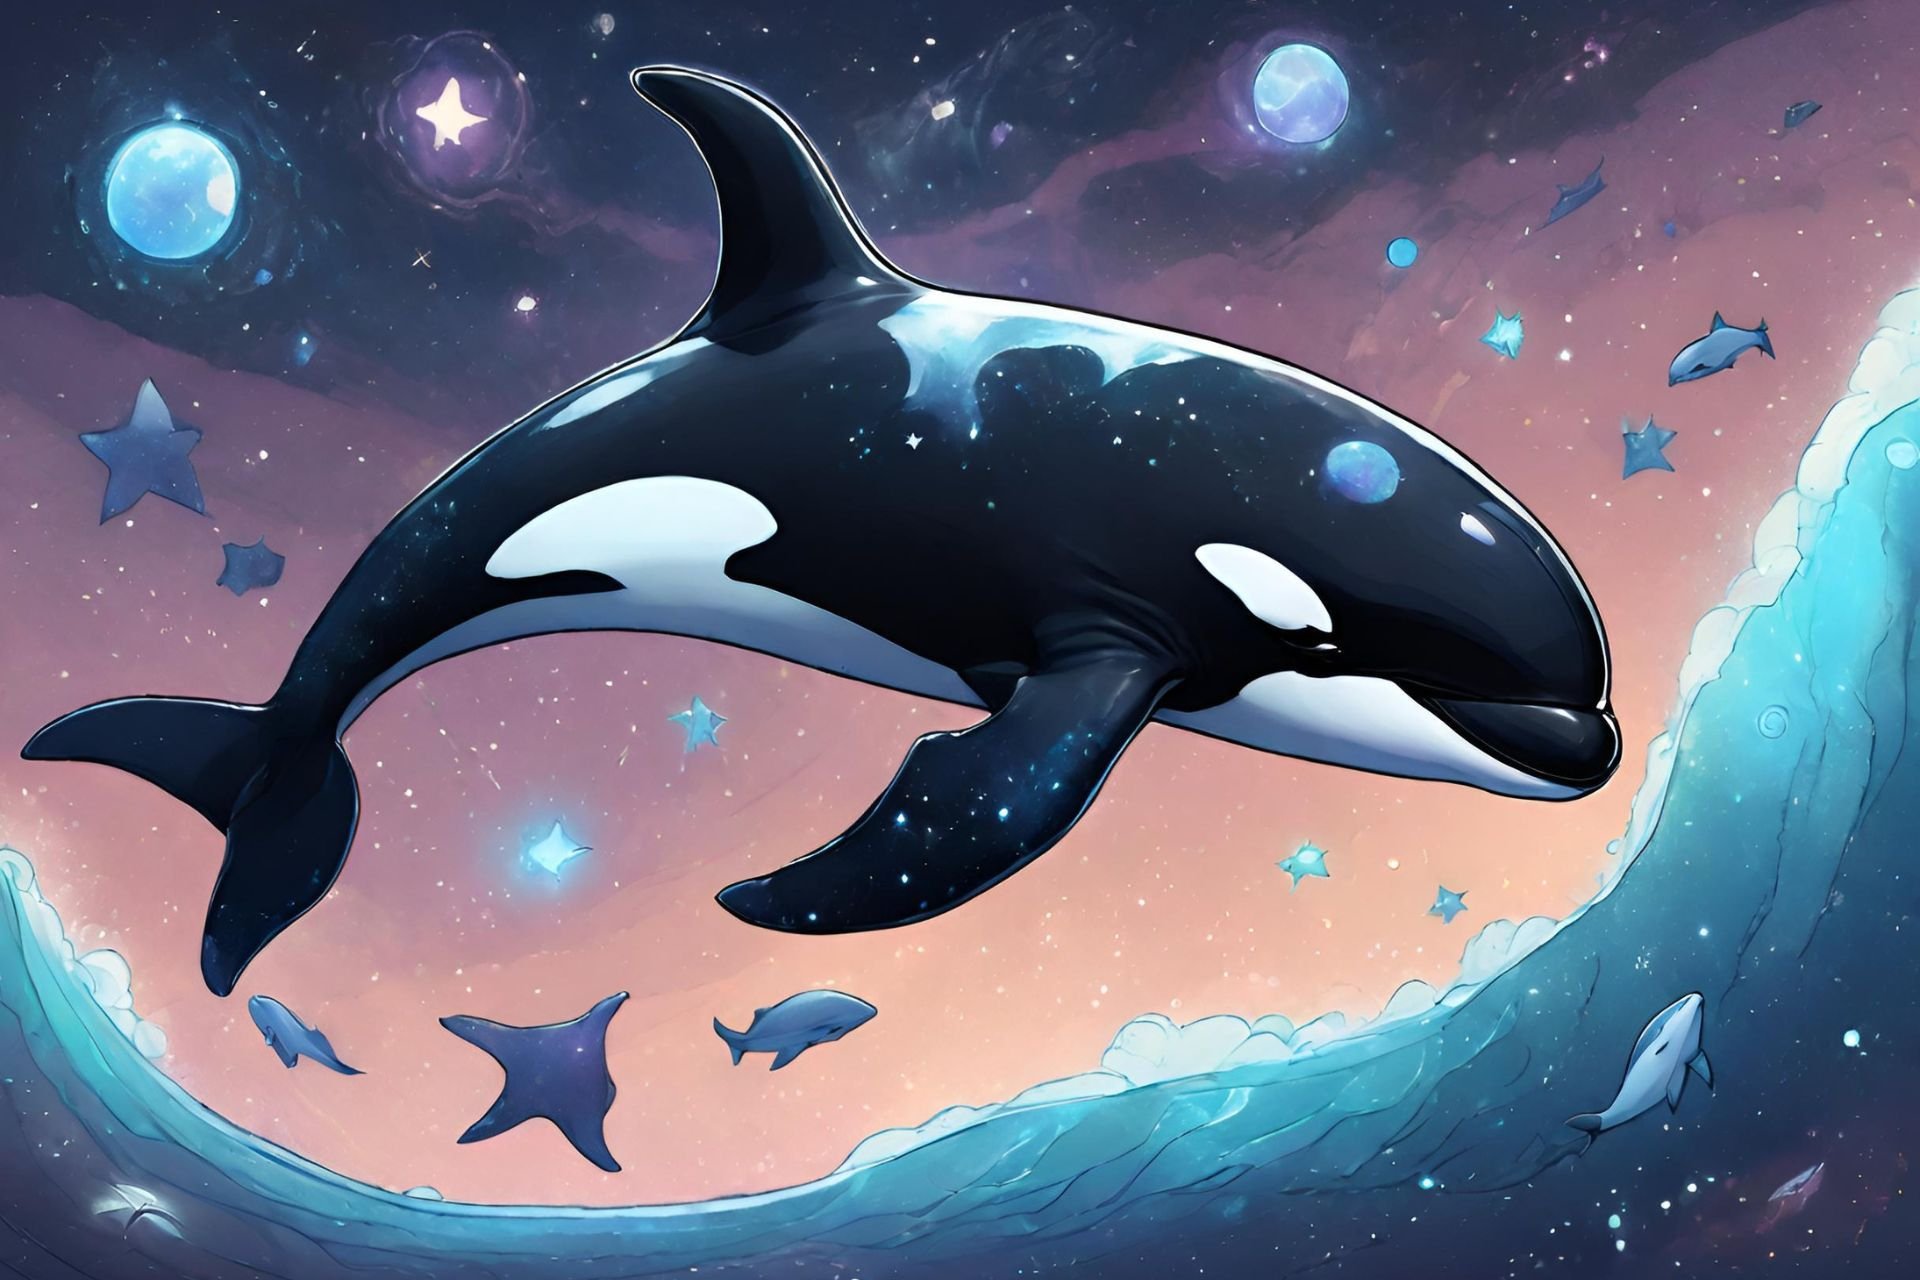 Orca-Math seen from an AI's perspective